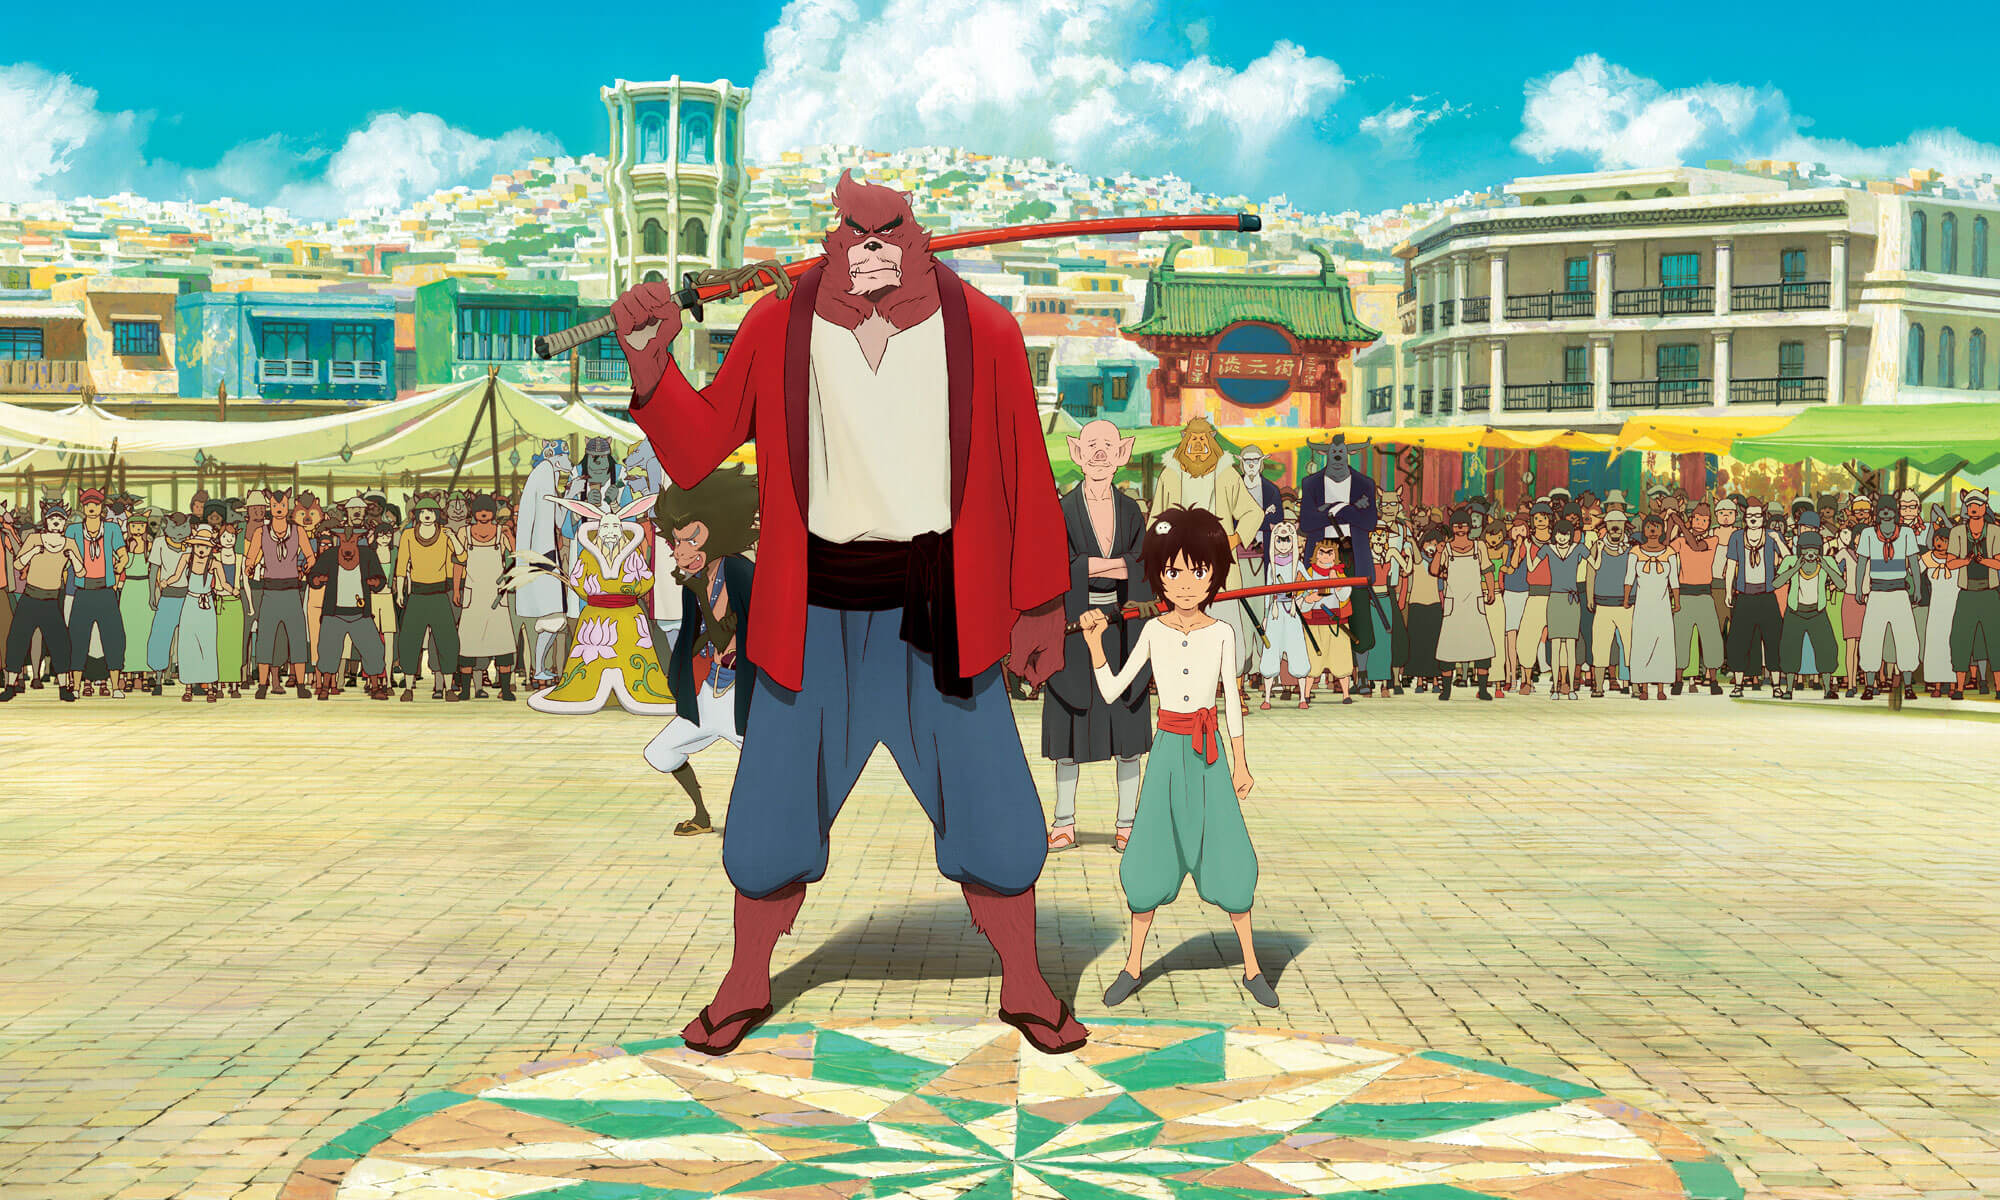 The Boy And The Beast HD wallpapers, Desktop wallpaper - most viewed